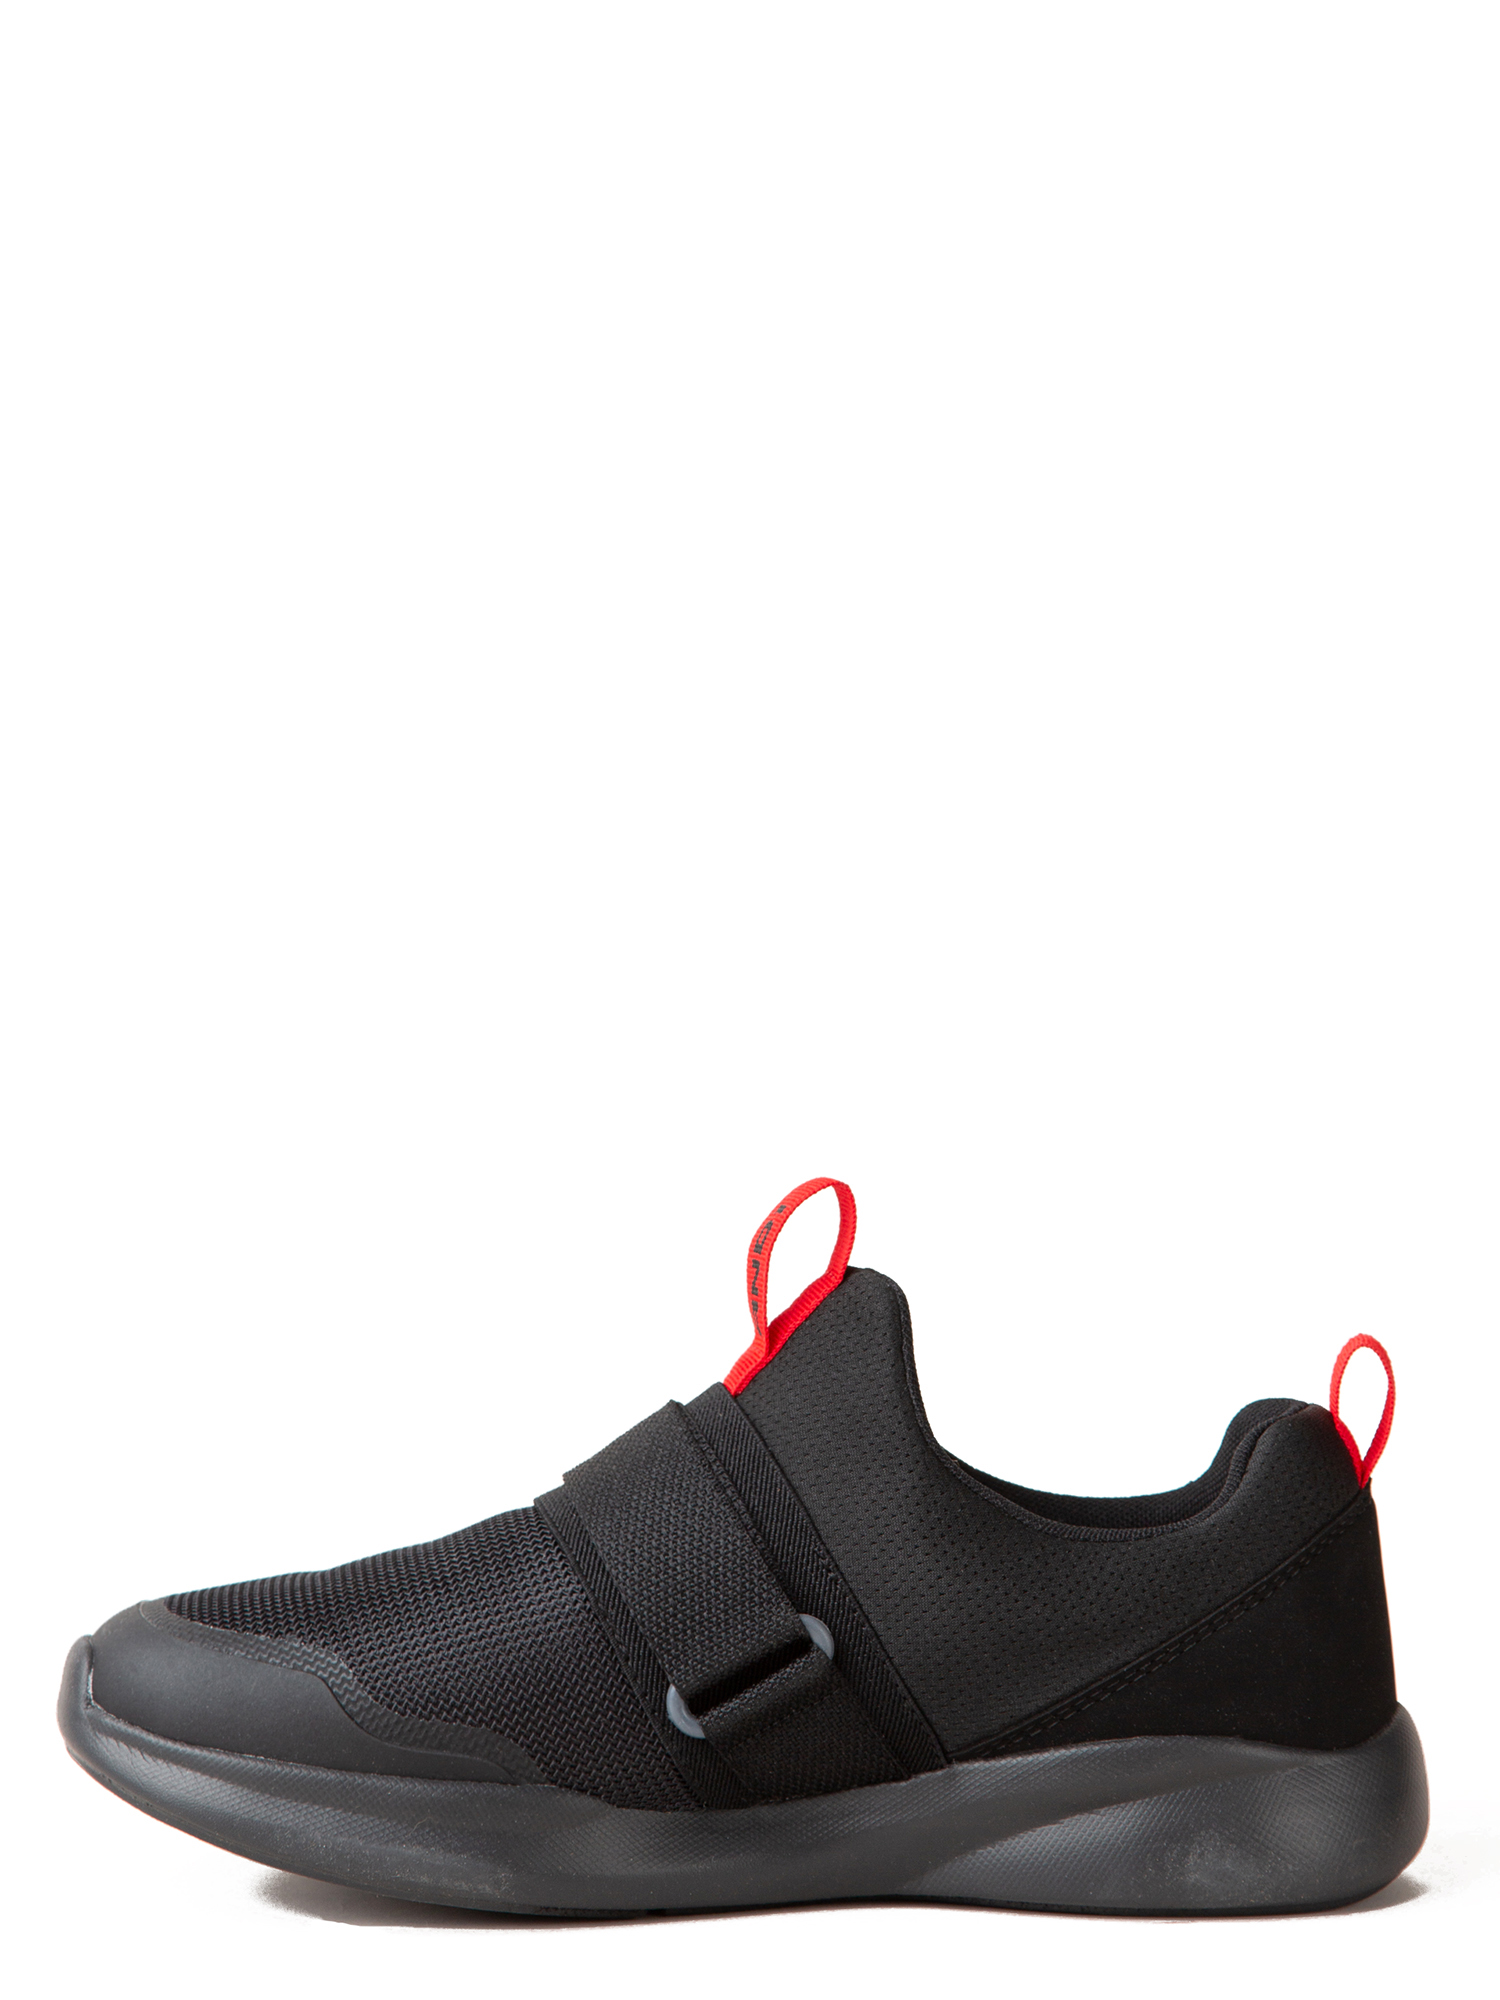 AND1 Men's Coach 3.0 Athletic Shoe - image 2 of 6